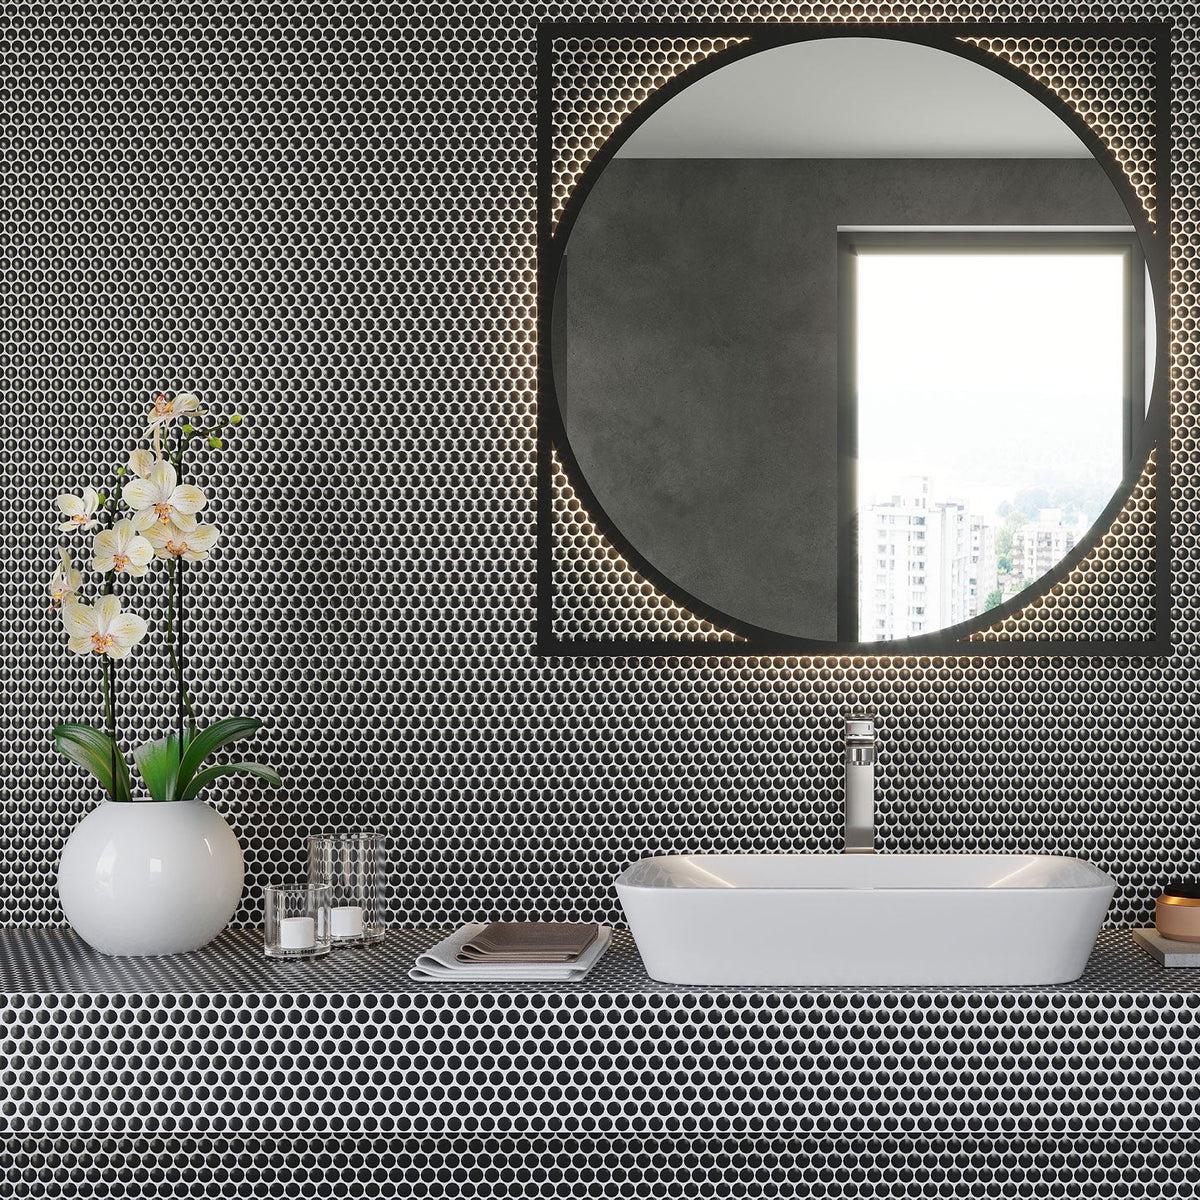 Modern bathroom with matte black penny round tile wall